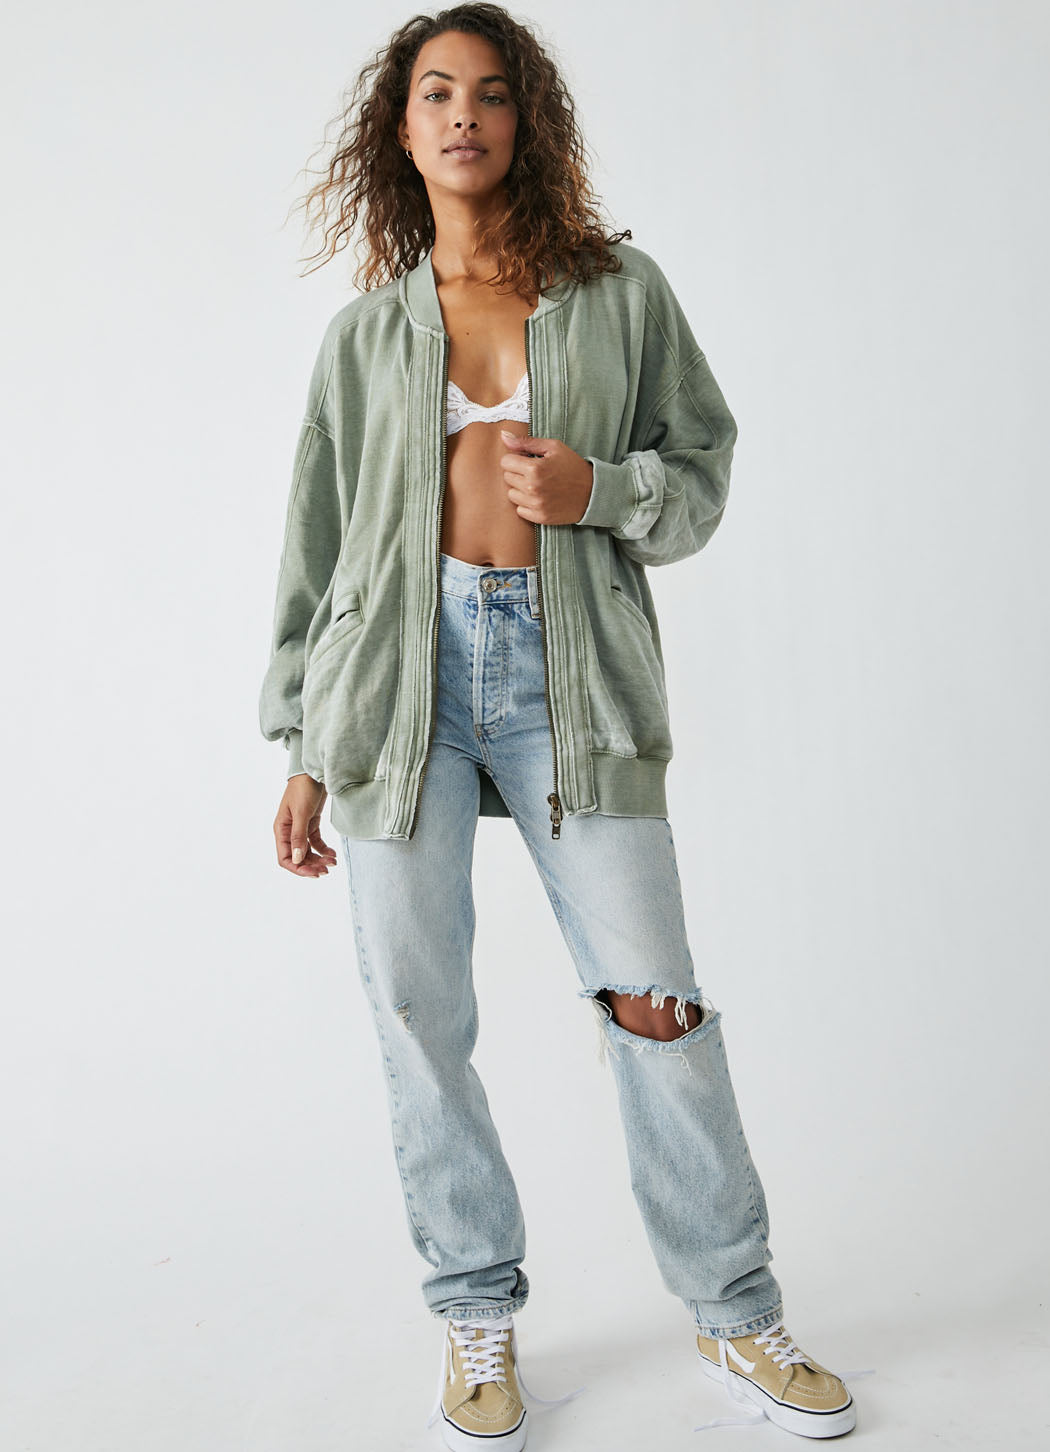 Free People Robby Bomber – Details Direct